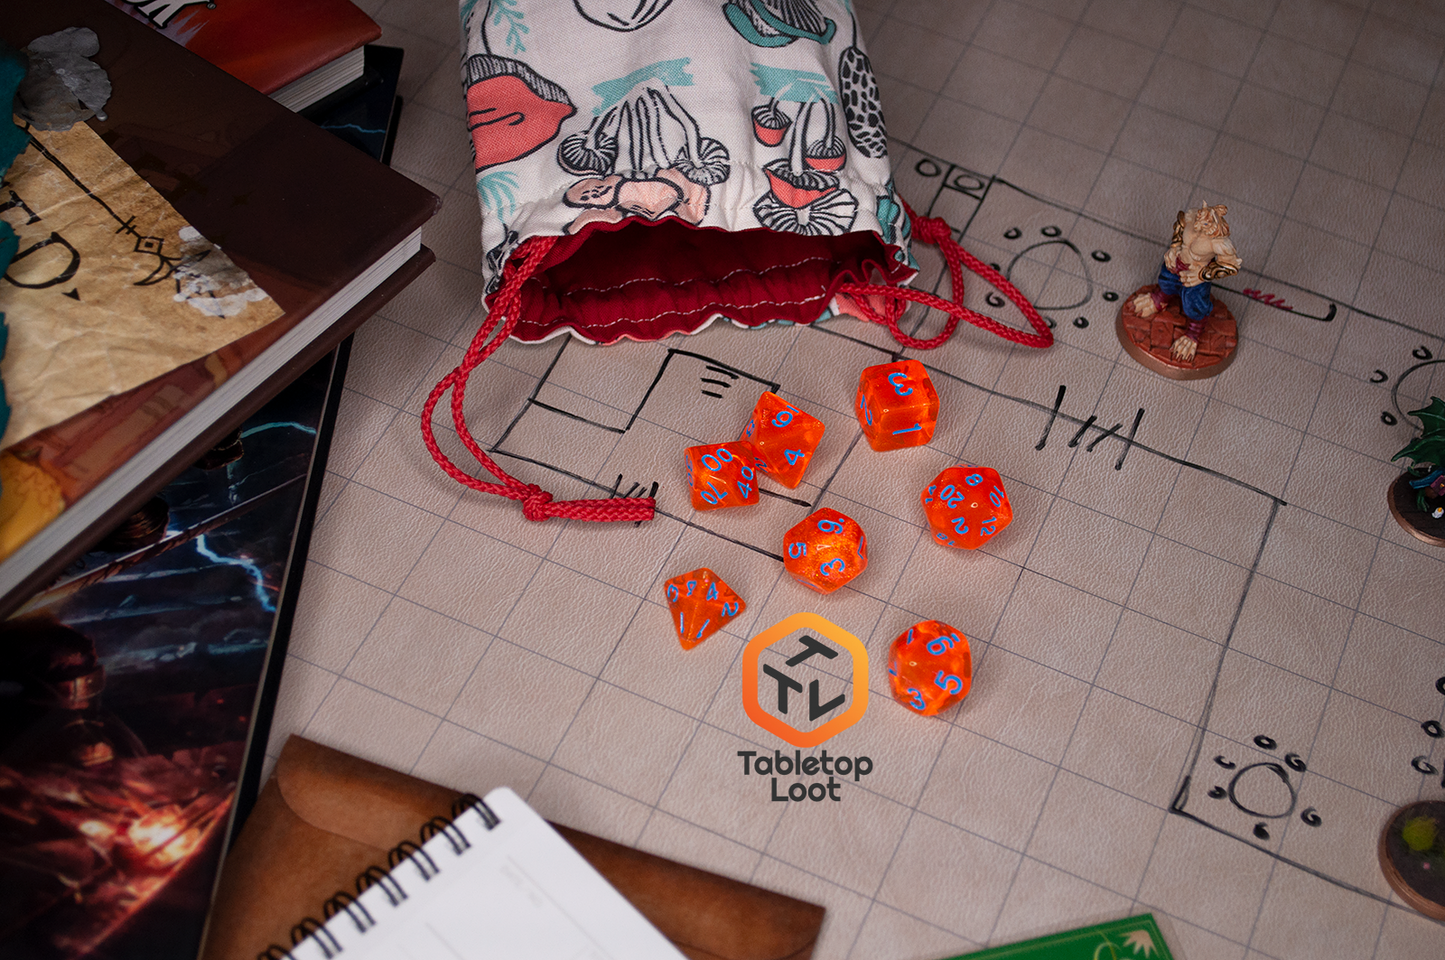 The Radioactive Orange 7 piece dice set from Tabletop Loot with sparkly orange resin and bright blue numbering.